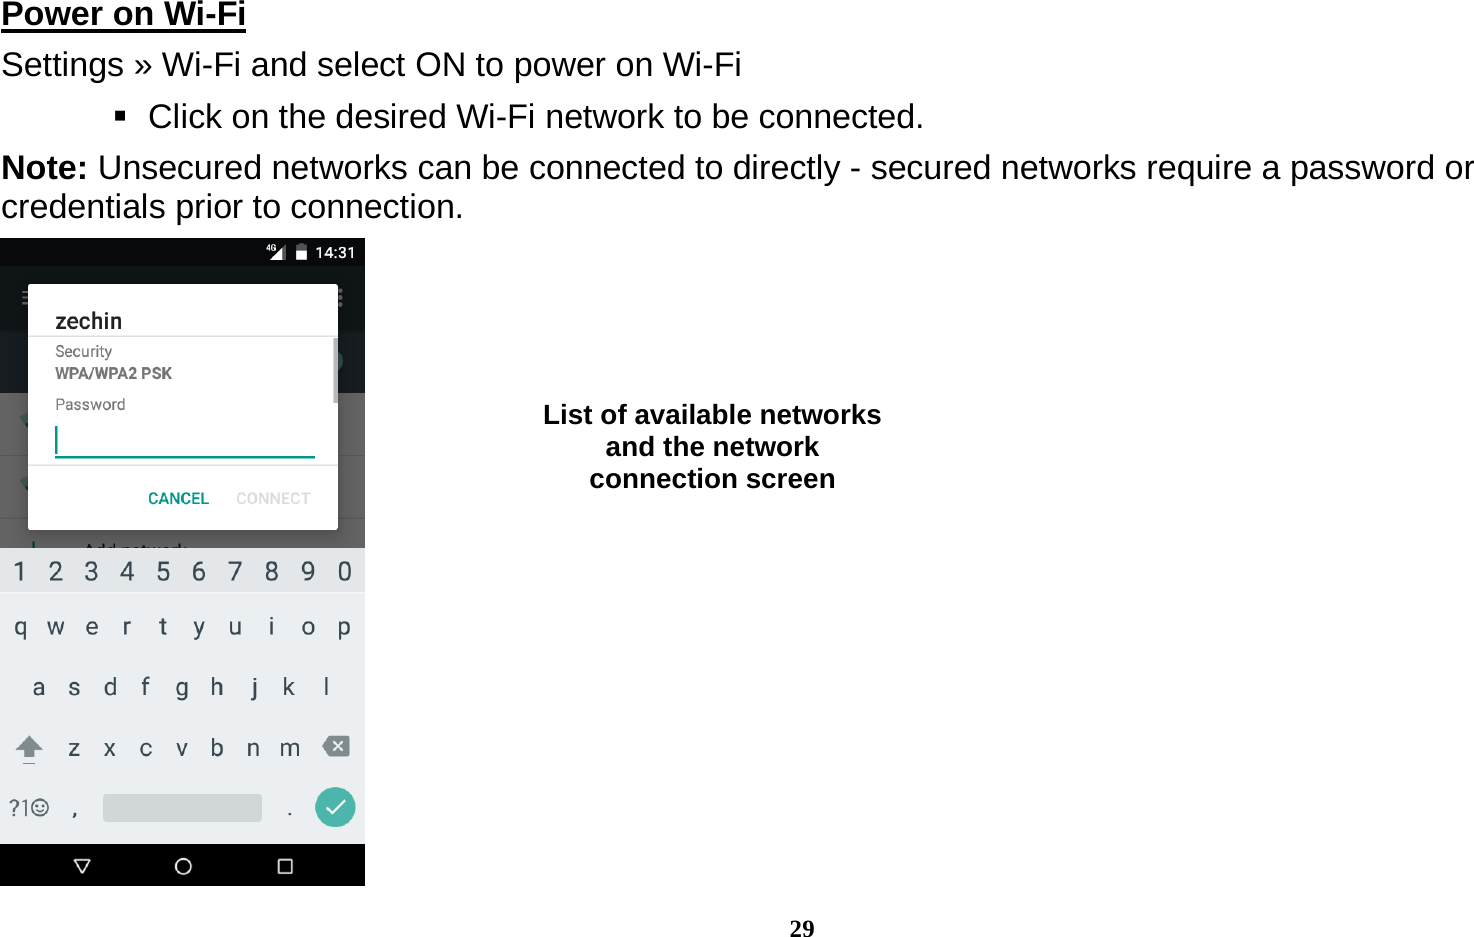  29 Power on Wi-Fi                                                                                 Settings » Wi-Fi and select ON to power on Wi-Fi    Click on the desired Wi-Fi network to be connected.                 Note: Unsecured networks can be connected to directly - secured networks require a password or credentials prior to connection.  List of available networks and the network connection screen 